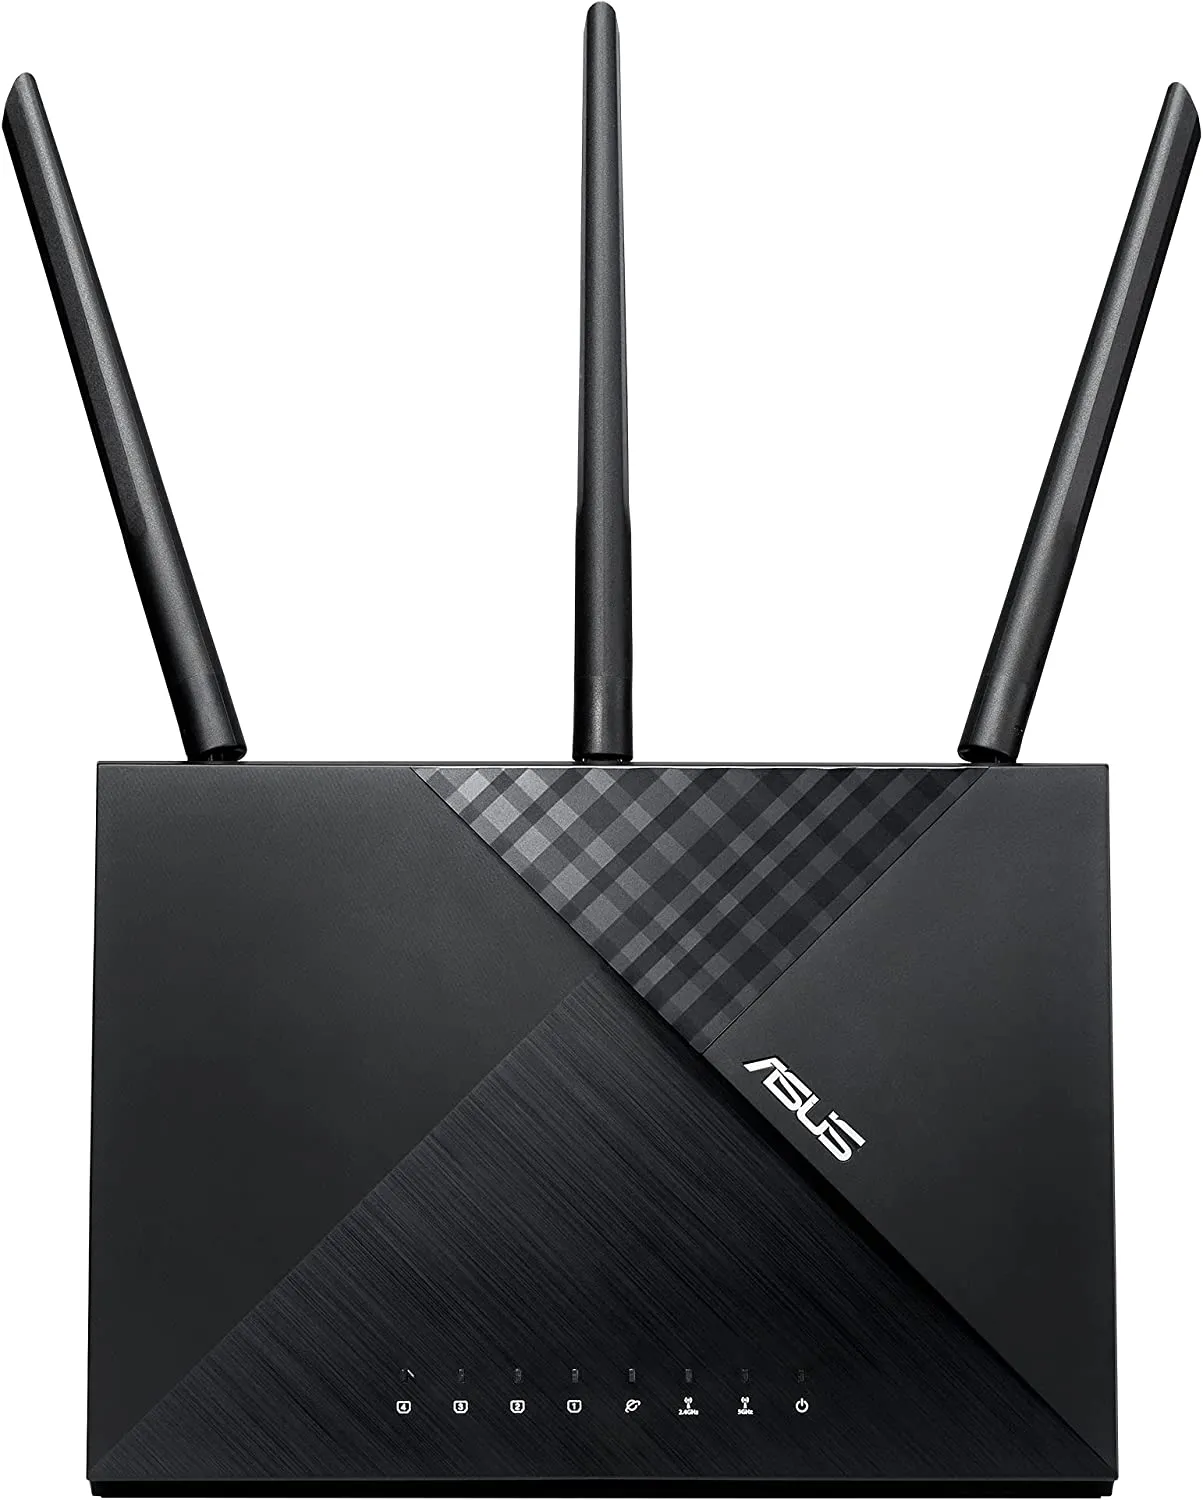 Router ASUS AC1750 (RT-ACRH18) Wi-Fi